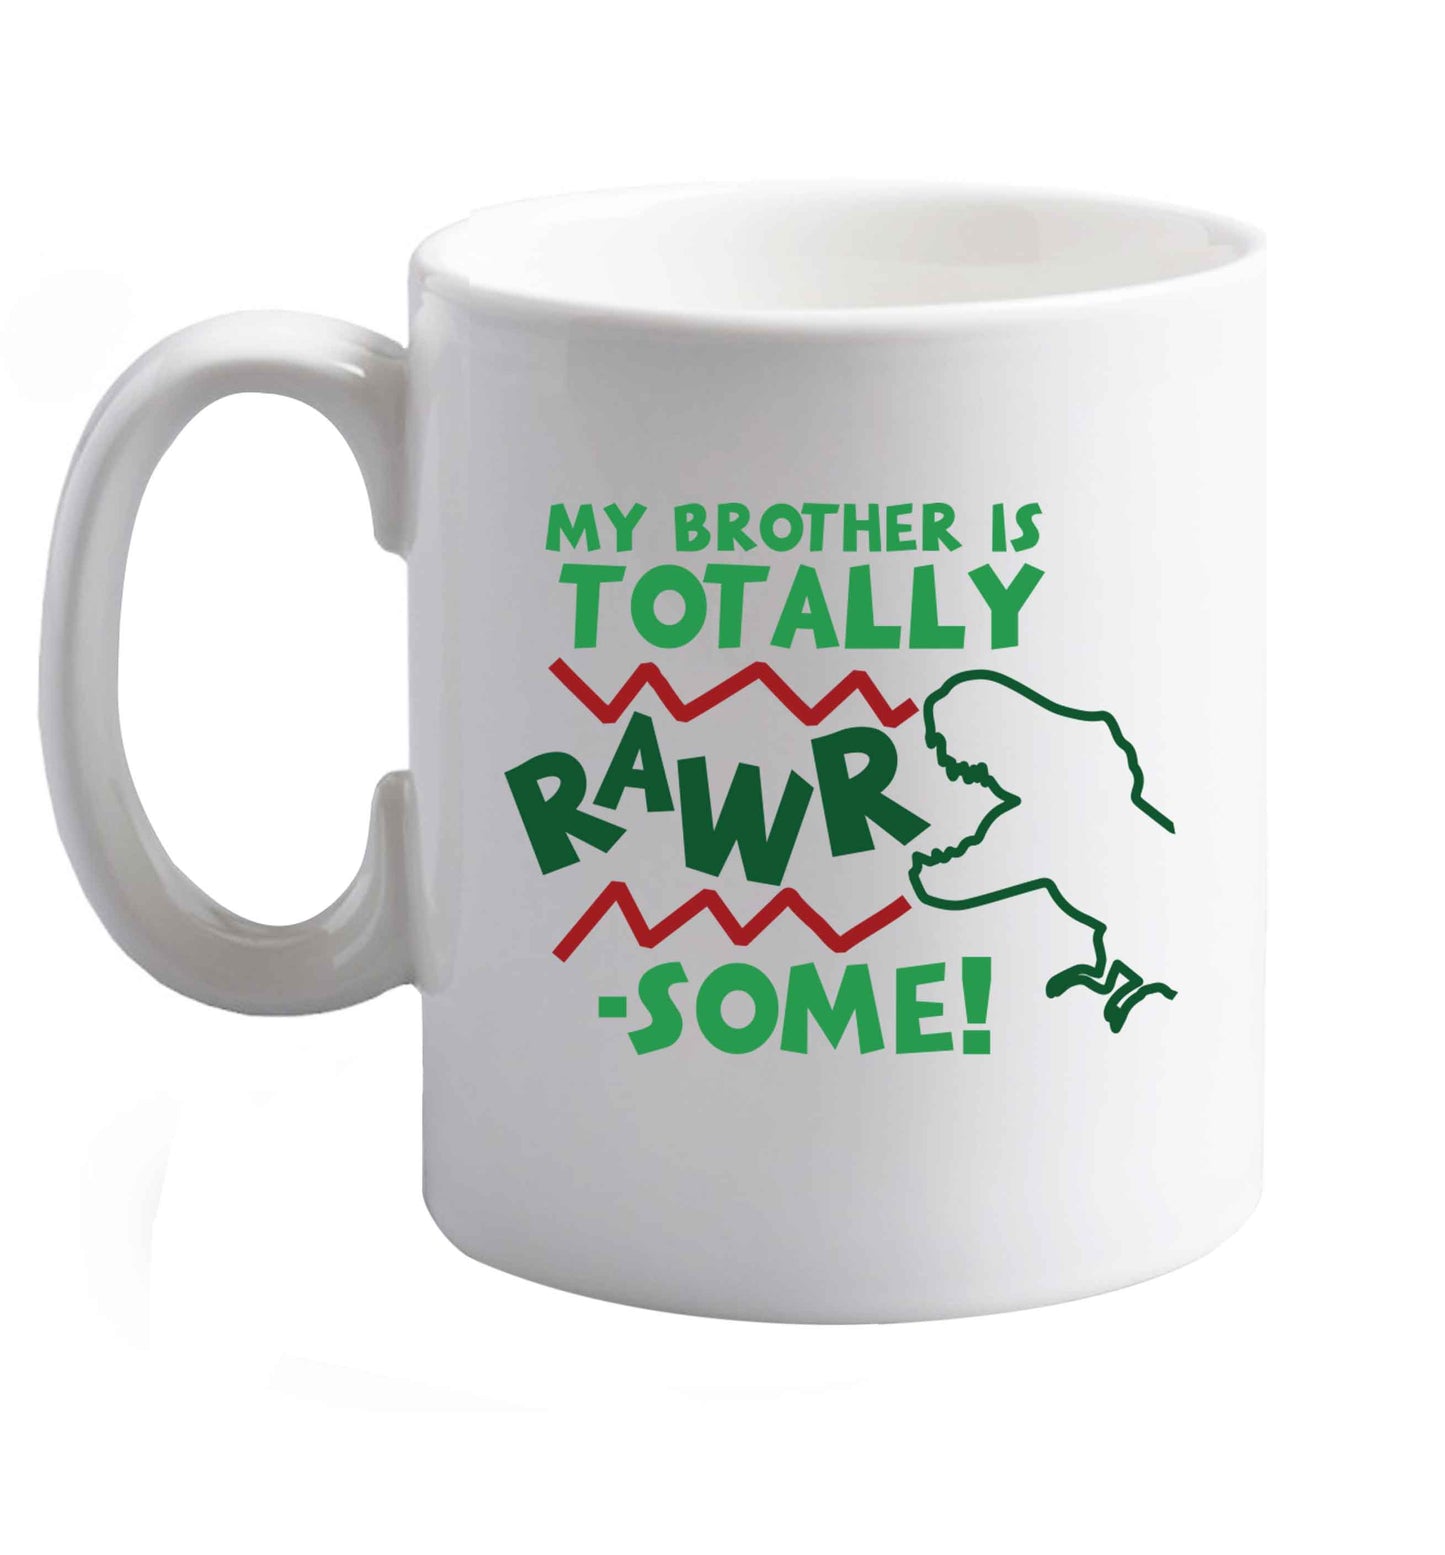 10 oz My brother is totally rawrsome ceramic mug right handed